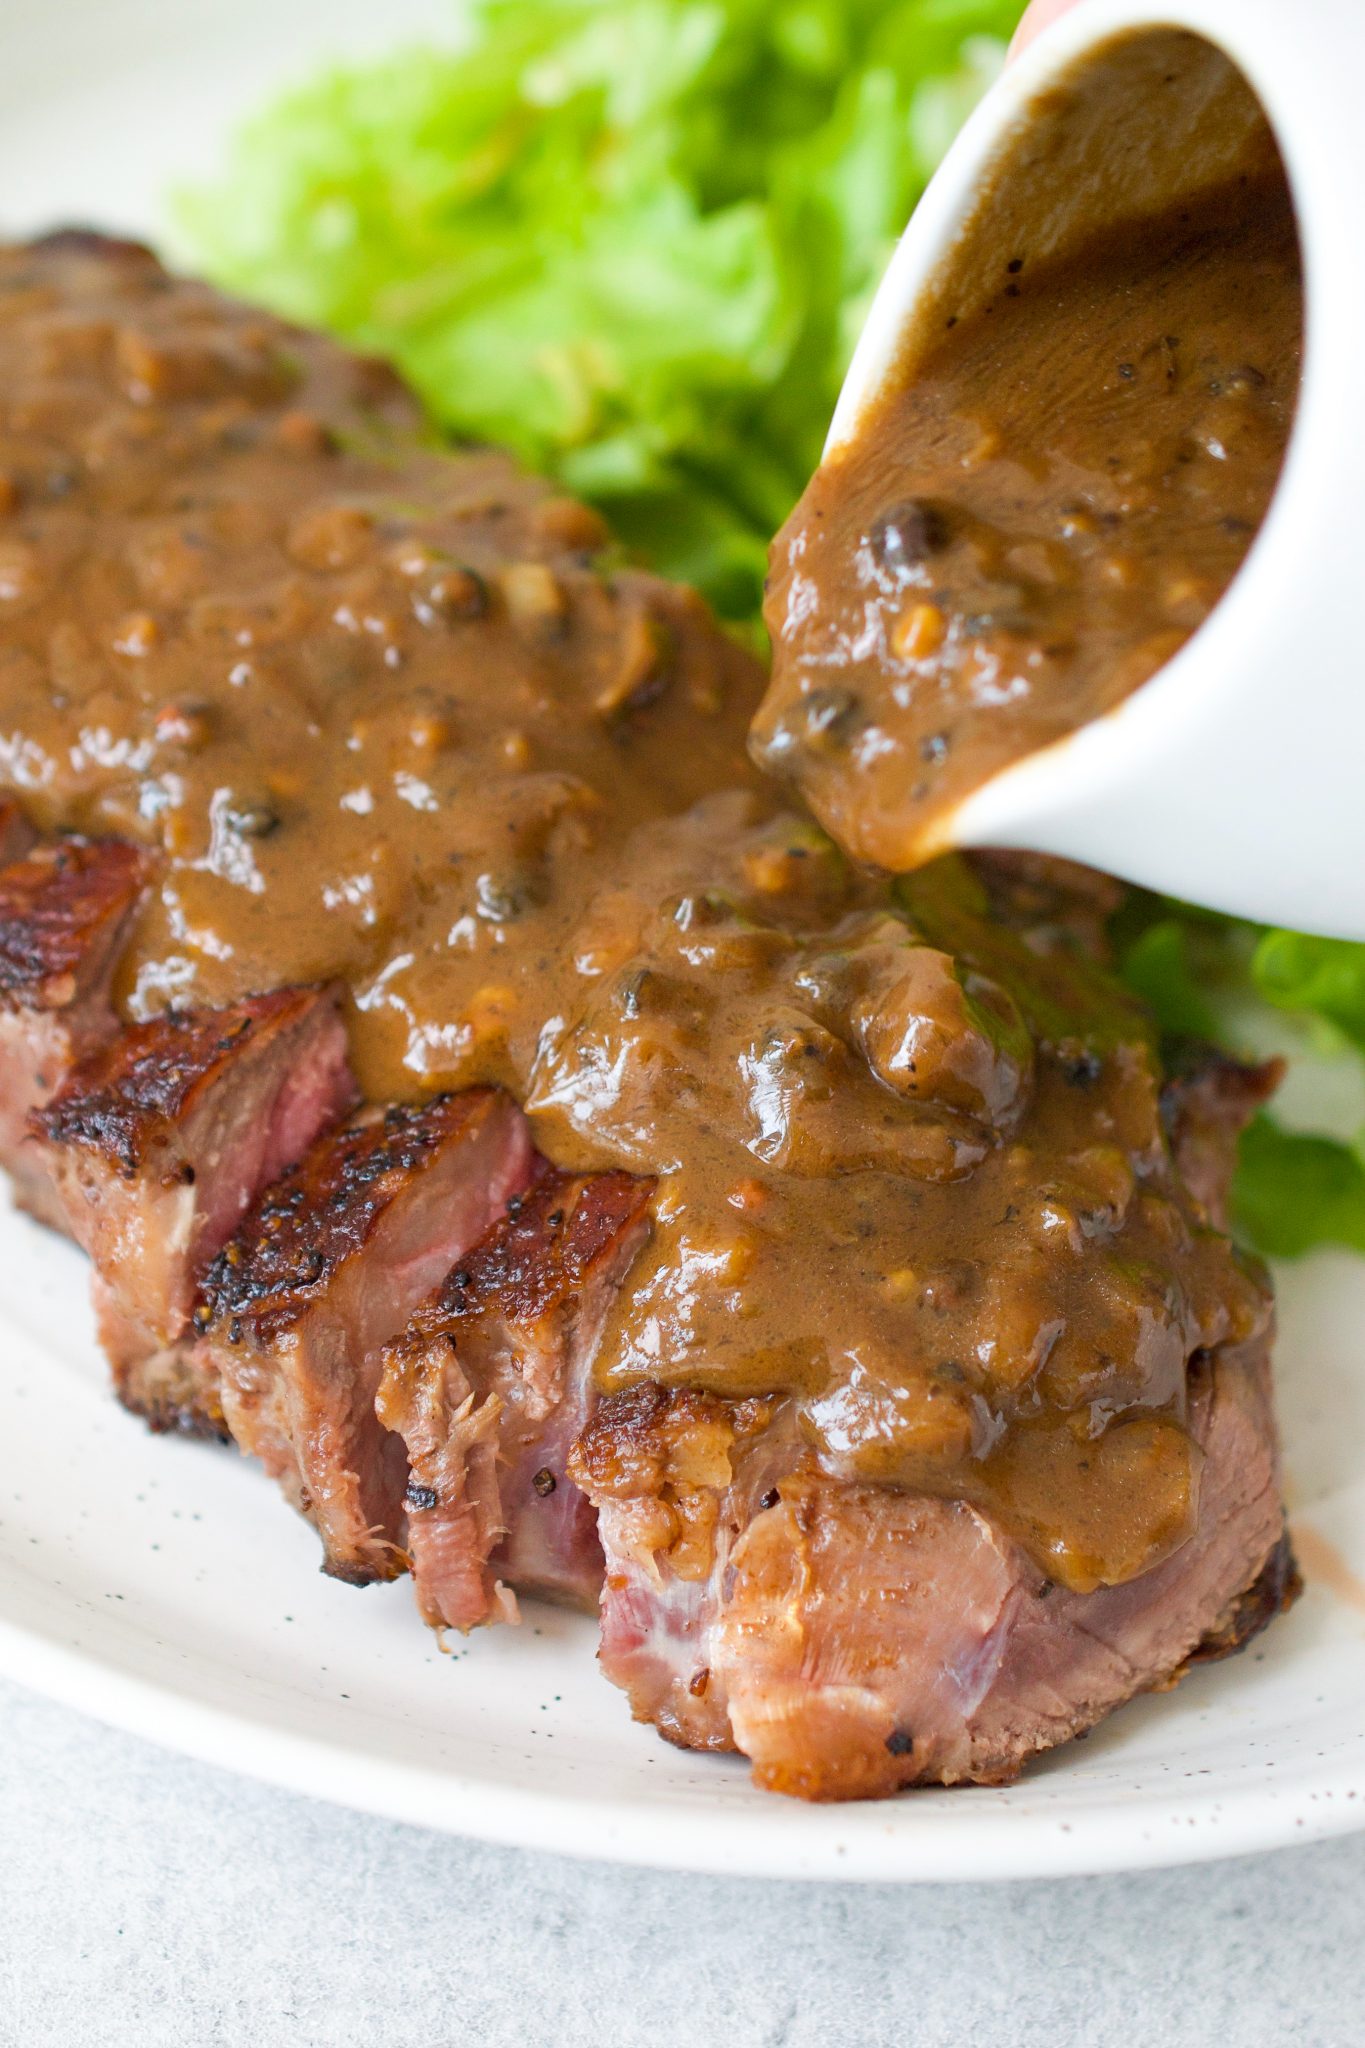 What What To Serve With Steak Au Poivre? 16 Best Side Dishes